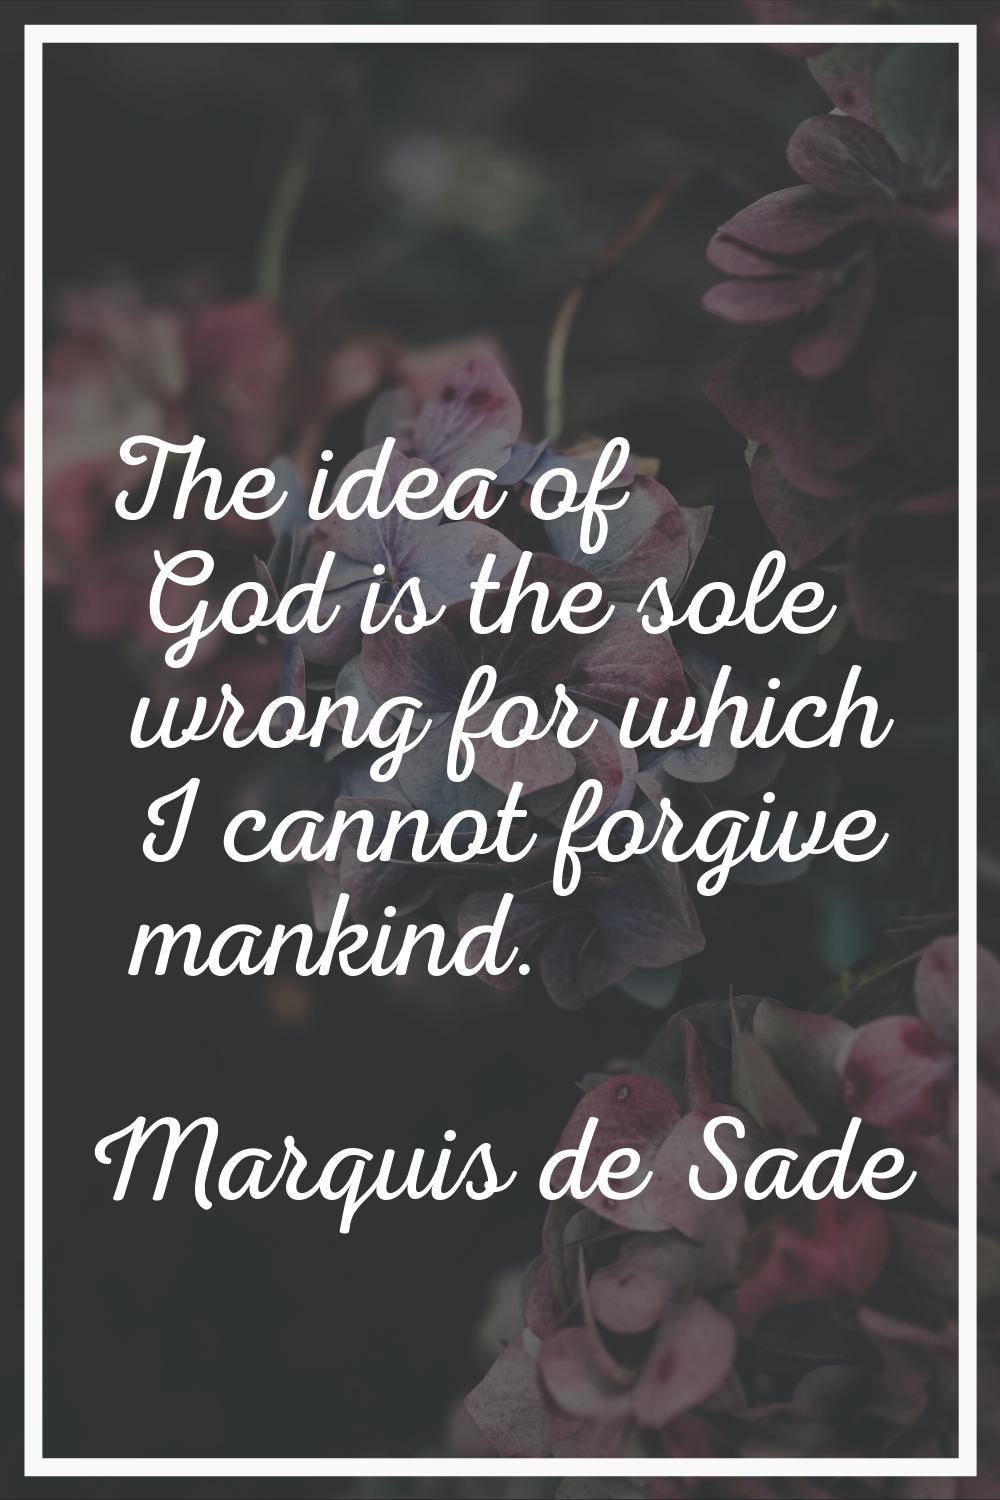 The idea of God is the sole wrong for which I cannot forgive mankind.